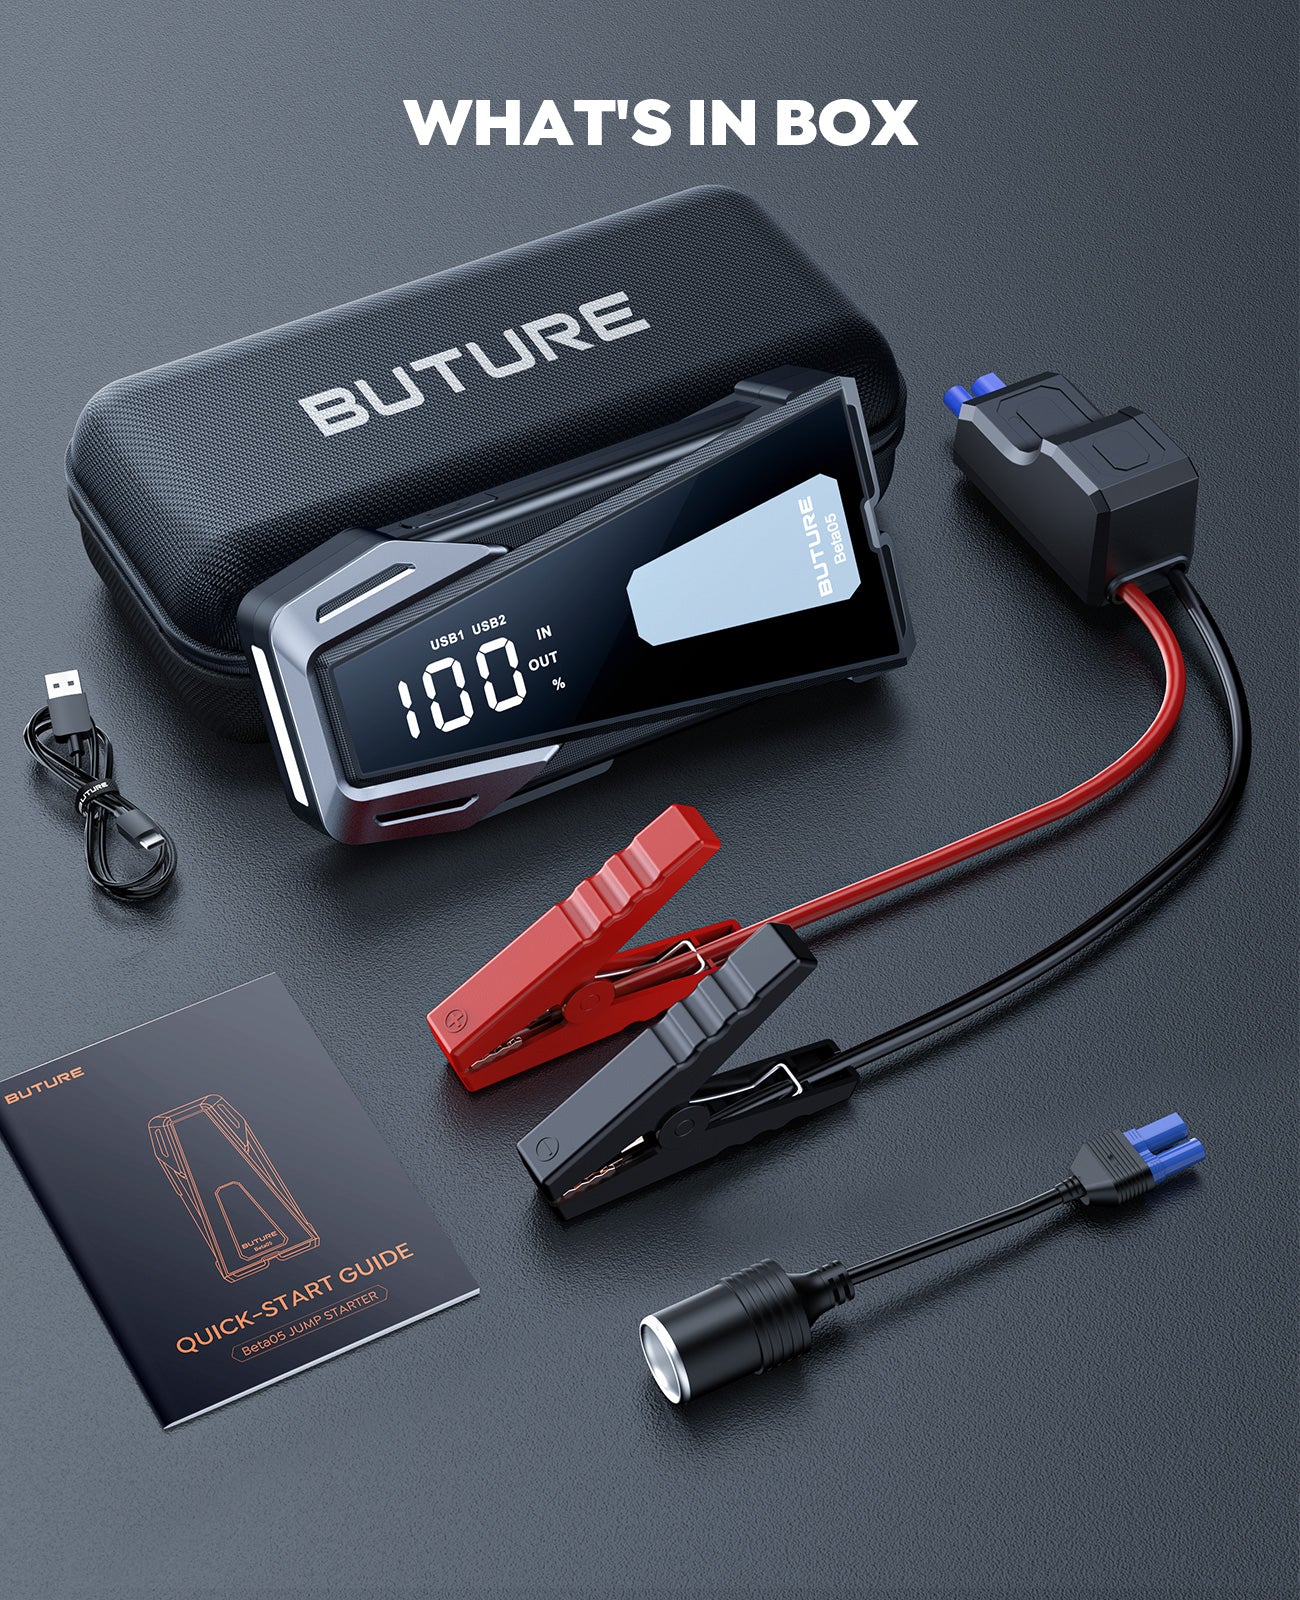 Accessories included with the Buture Beta05 Jump Starter